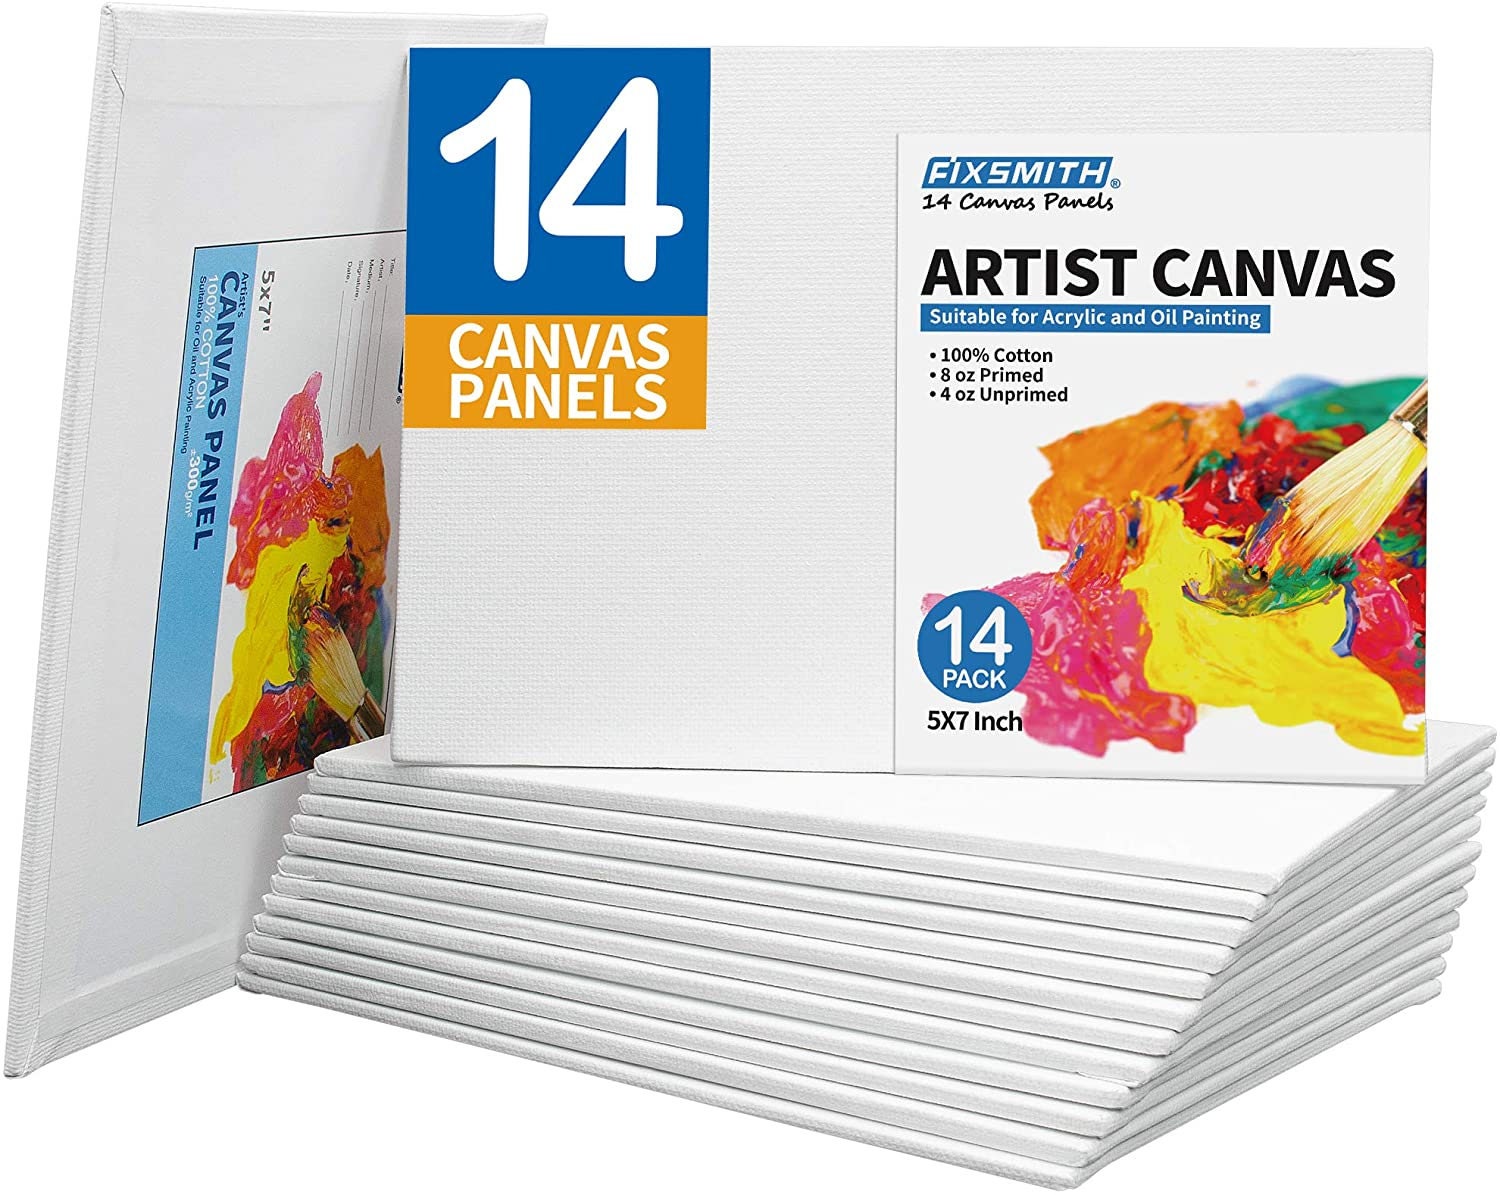 FIXSMITH Painting Canvas Panel Boards - 5x7 Inch Art Canvas,24 Pack with  FIXSMITH Painting Canvas Panels- 24 Pack Canvas Board,8x10 Inch